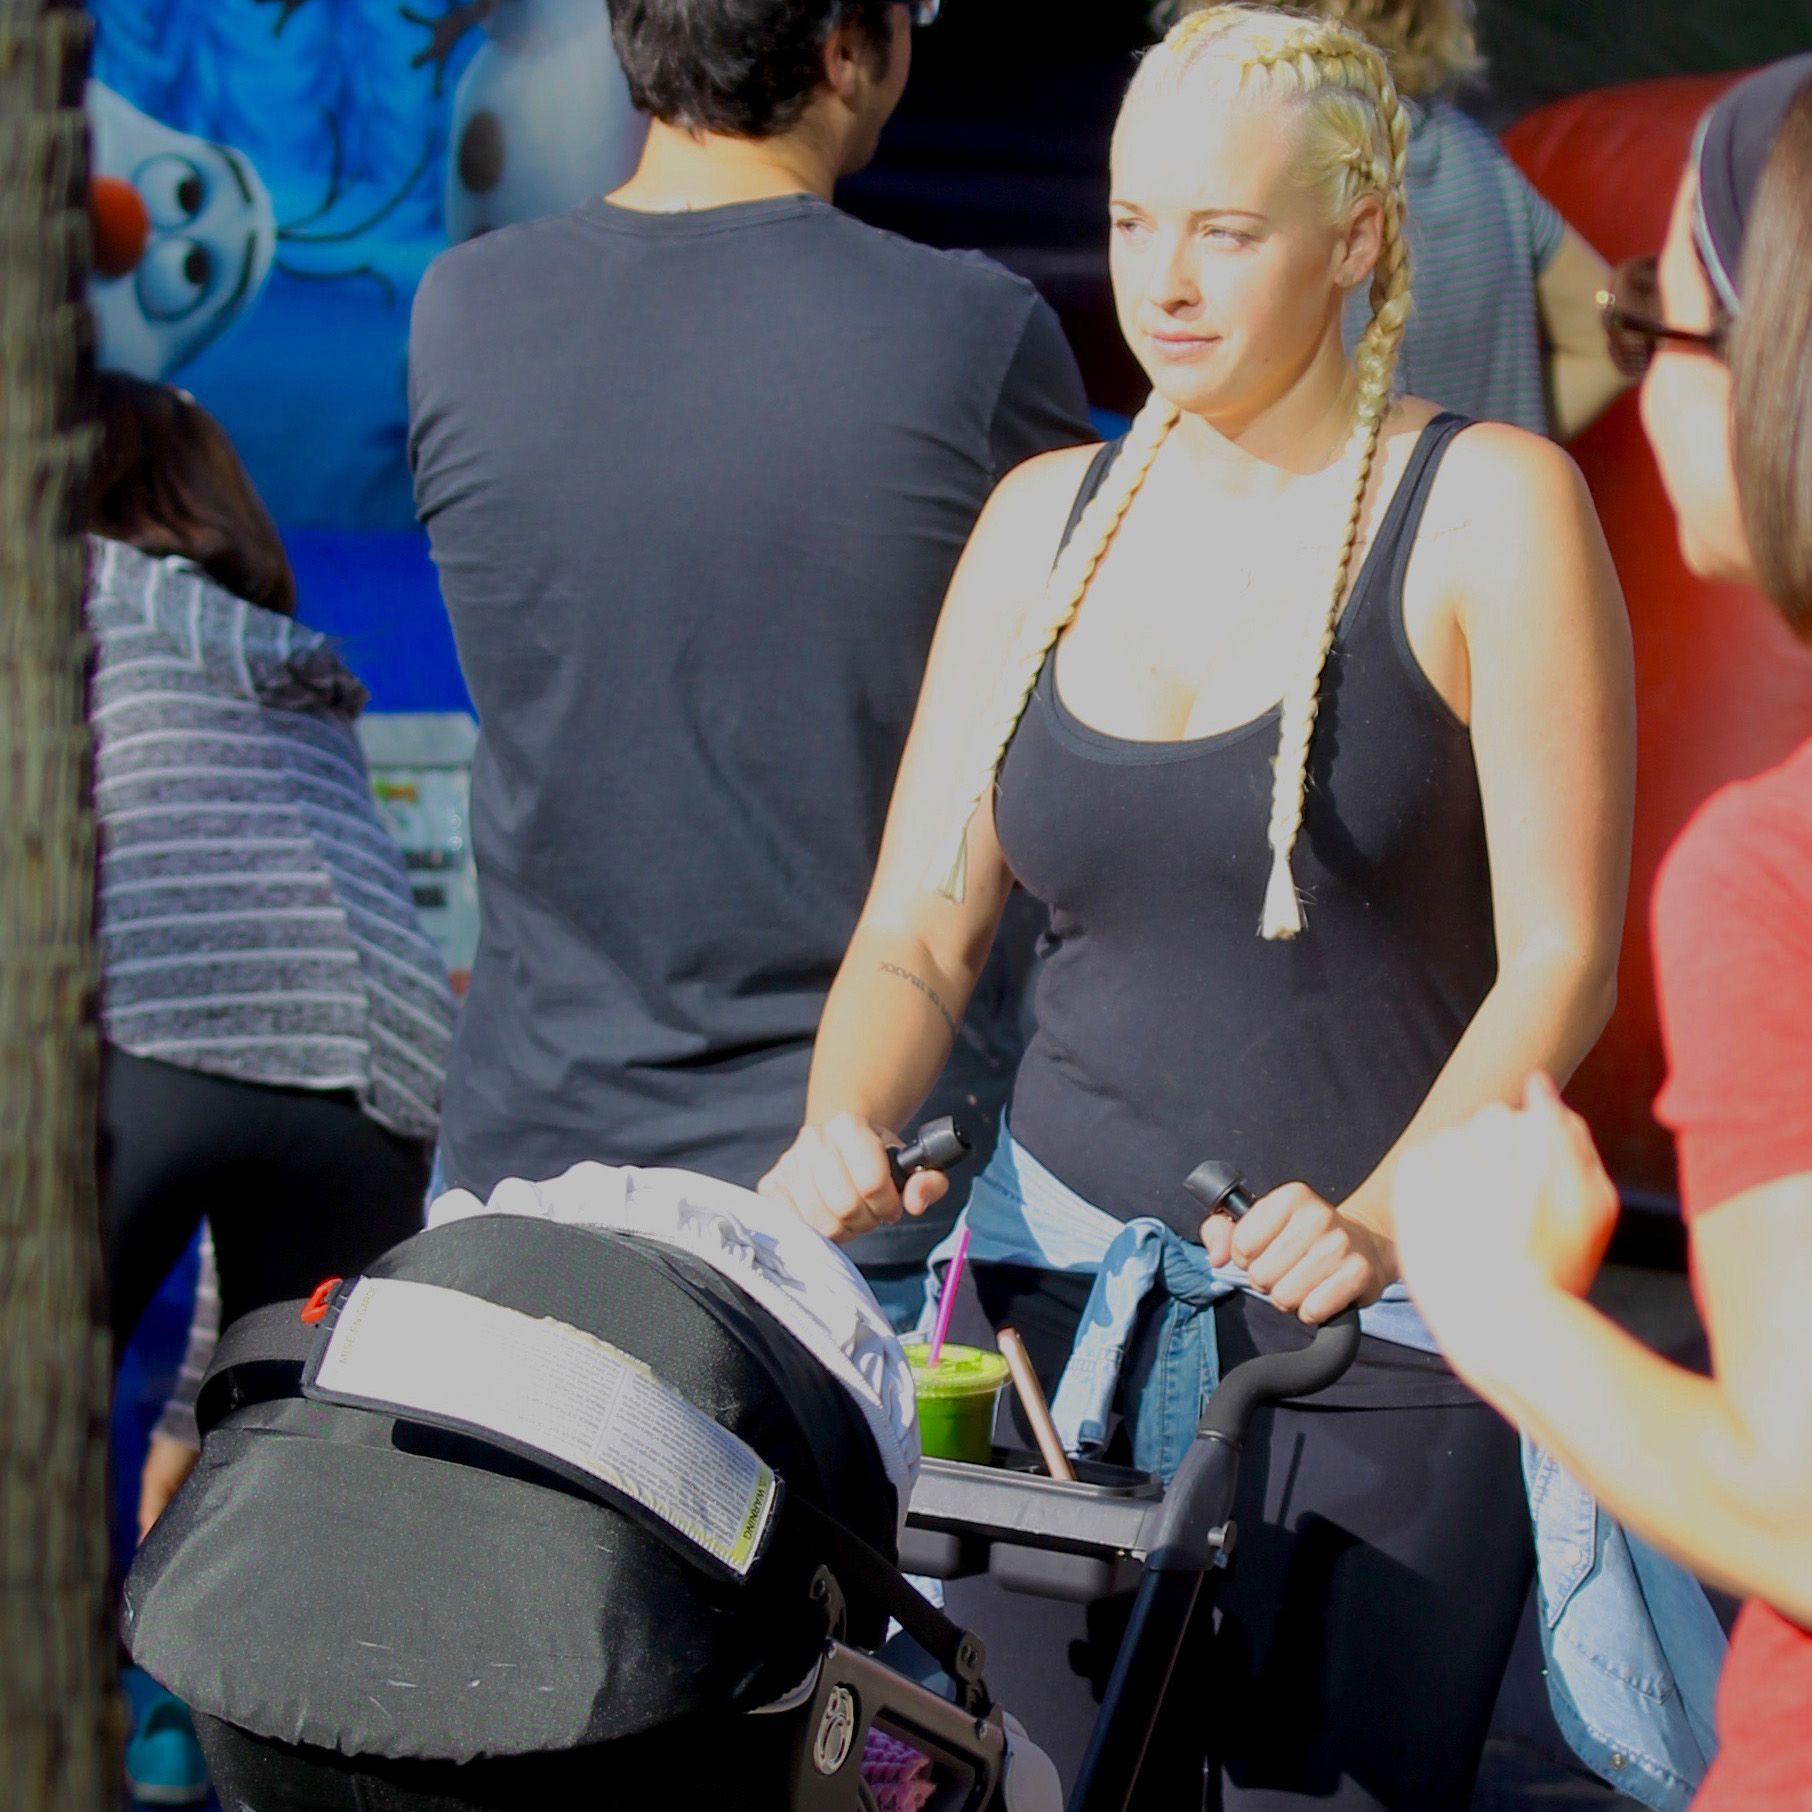 Gavin Rossdale's Alleged Mistress Mindy Mann Steps Out With Her Baby